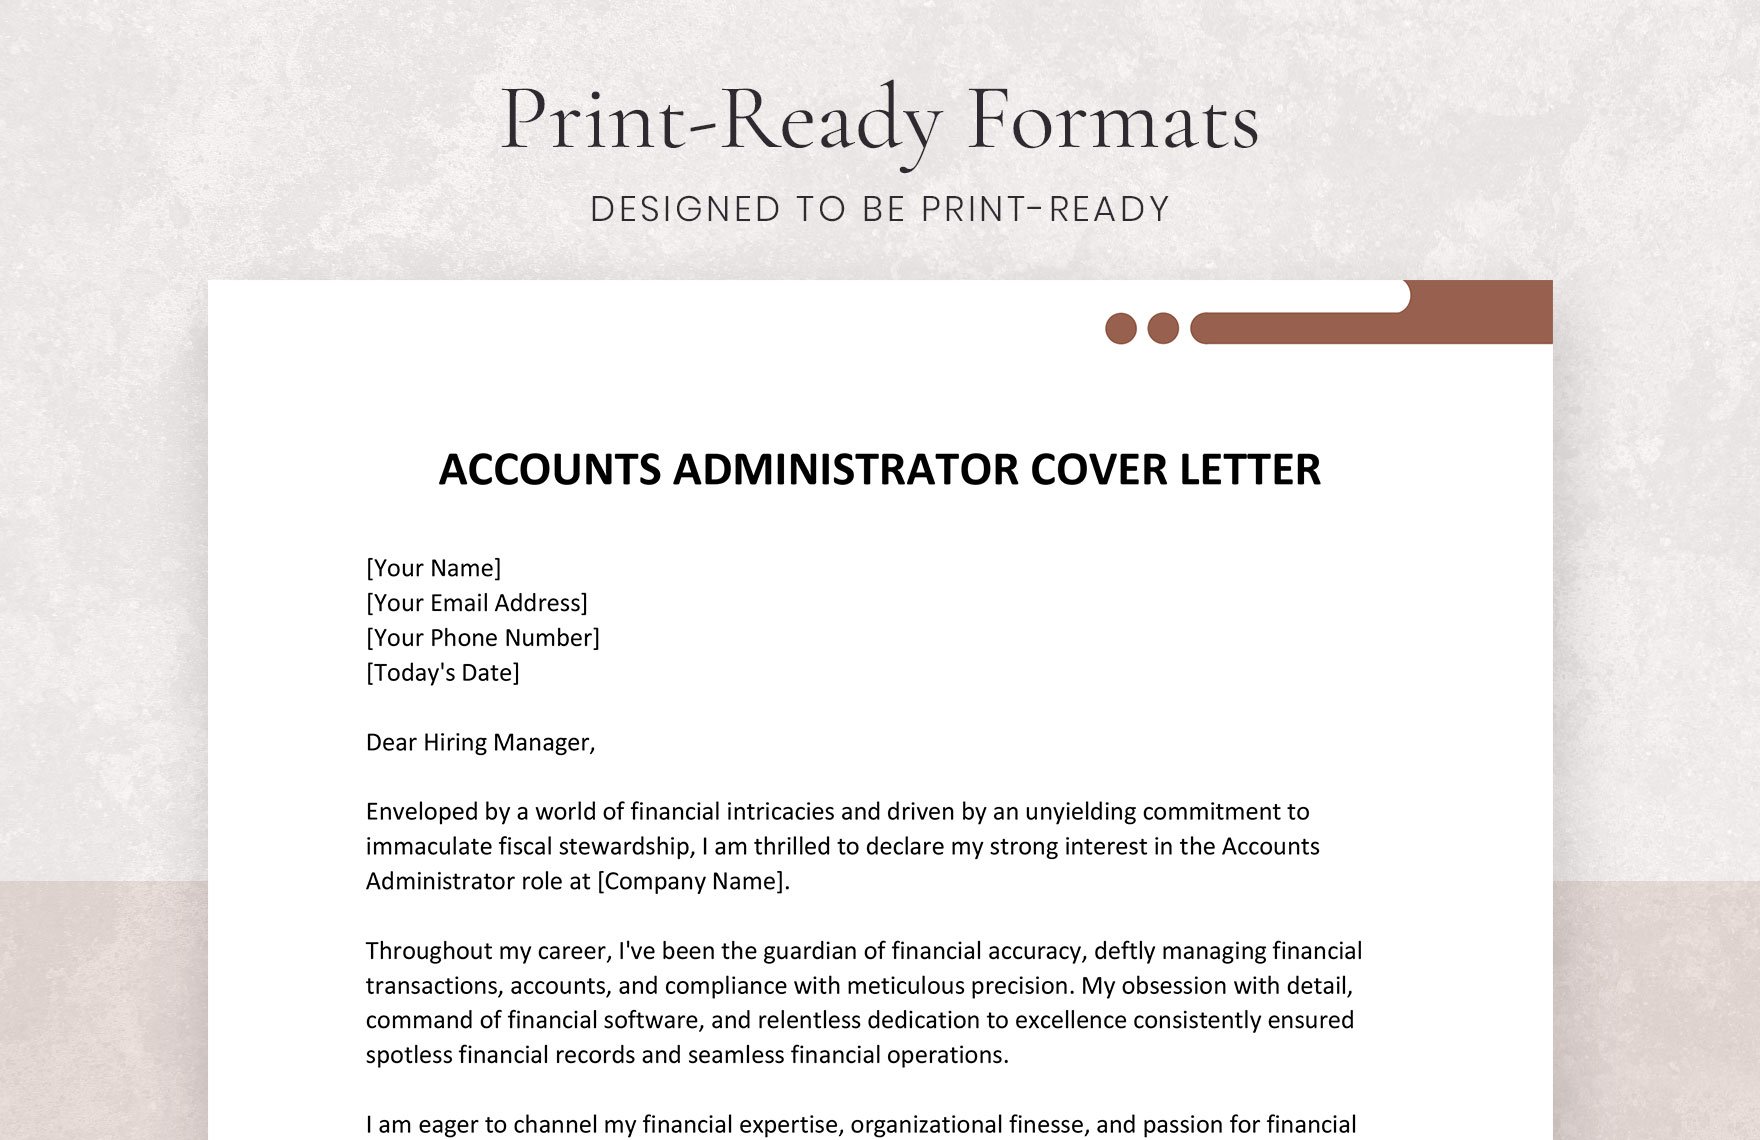 Accounts Administrator Cover Letter